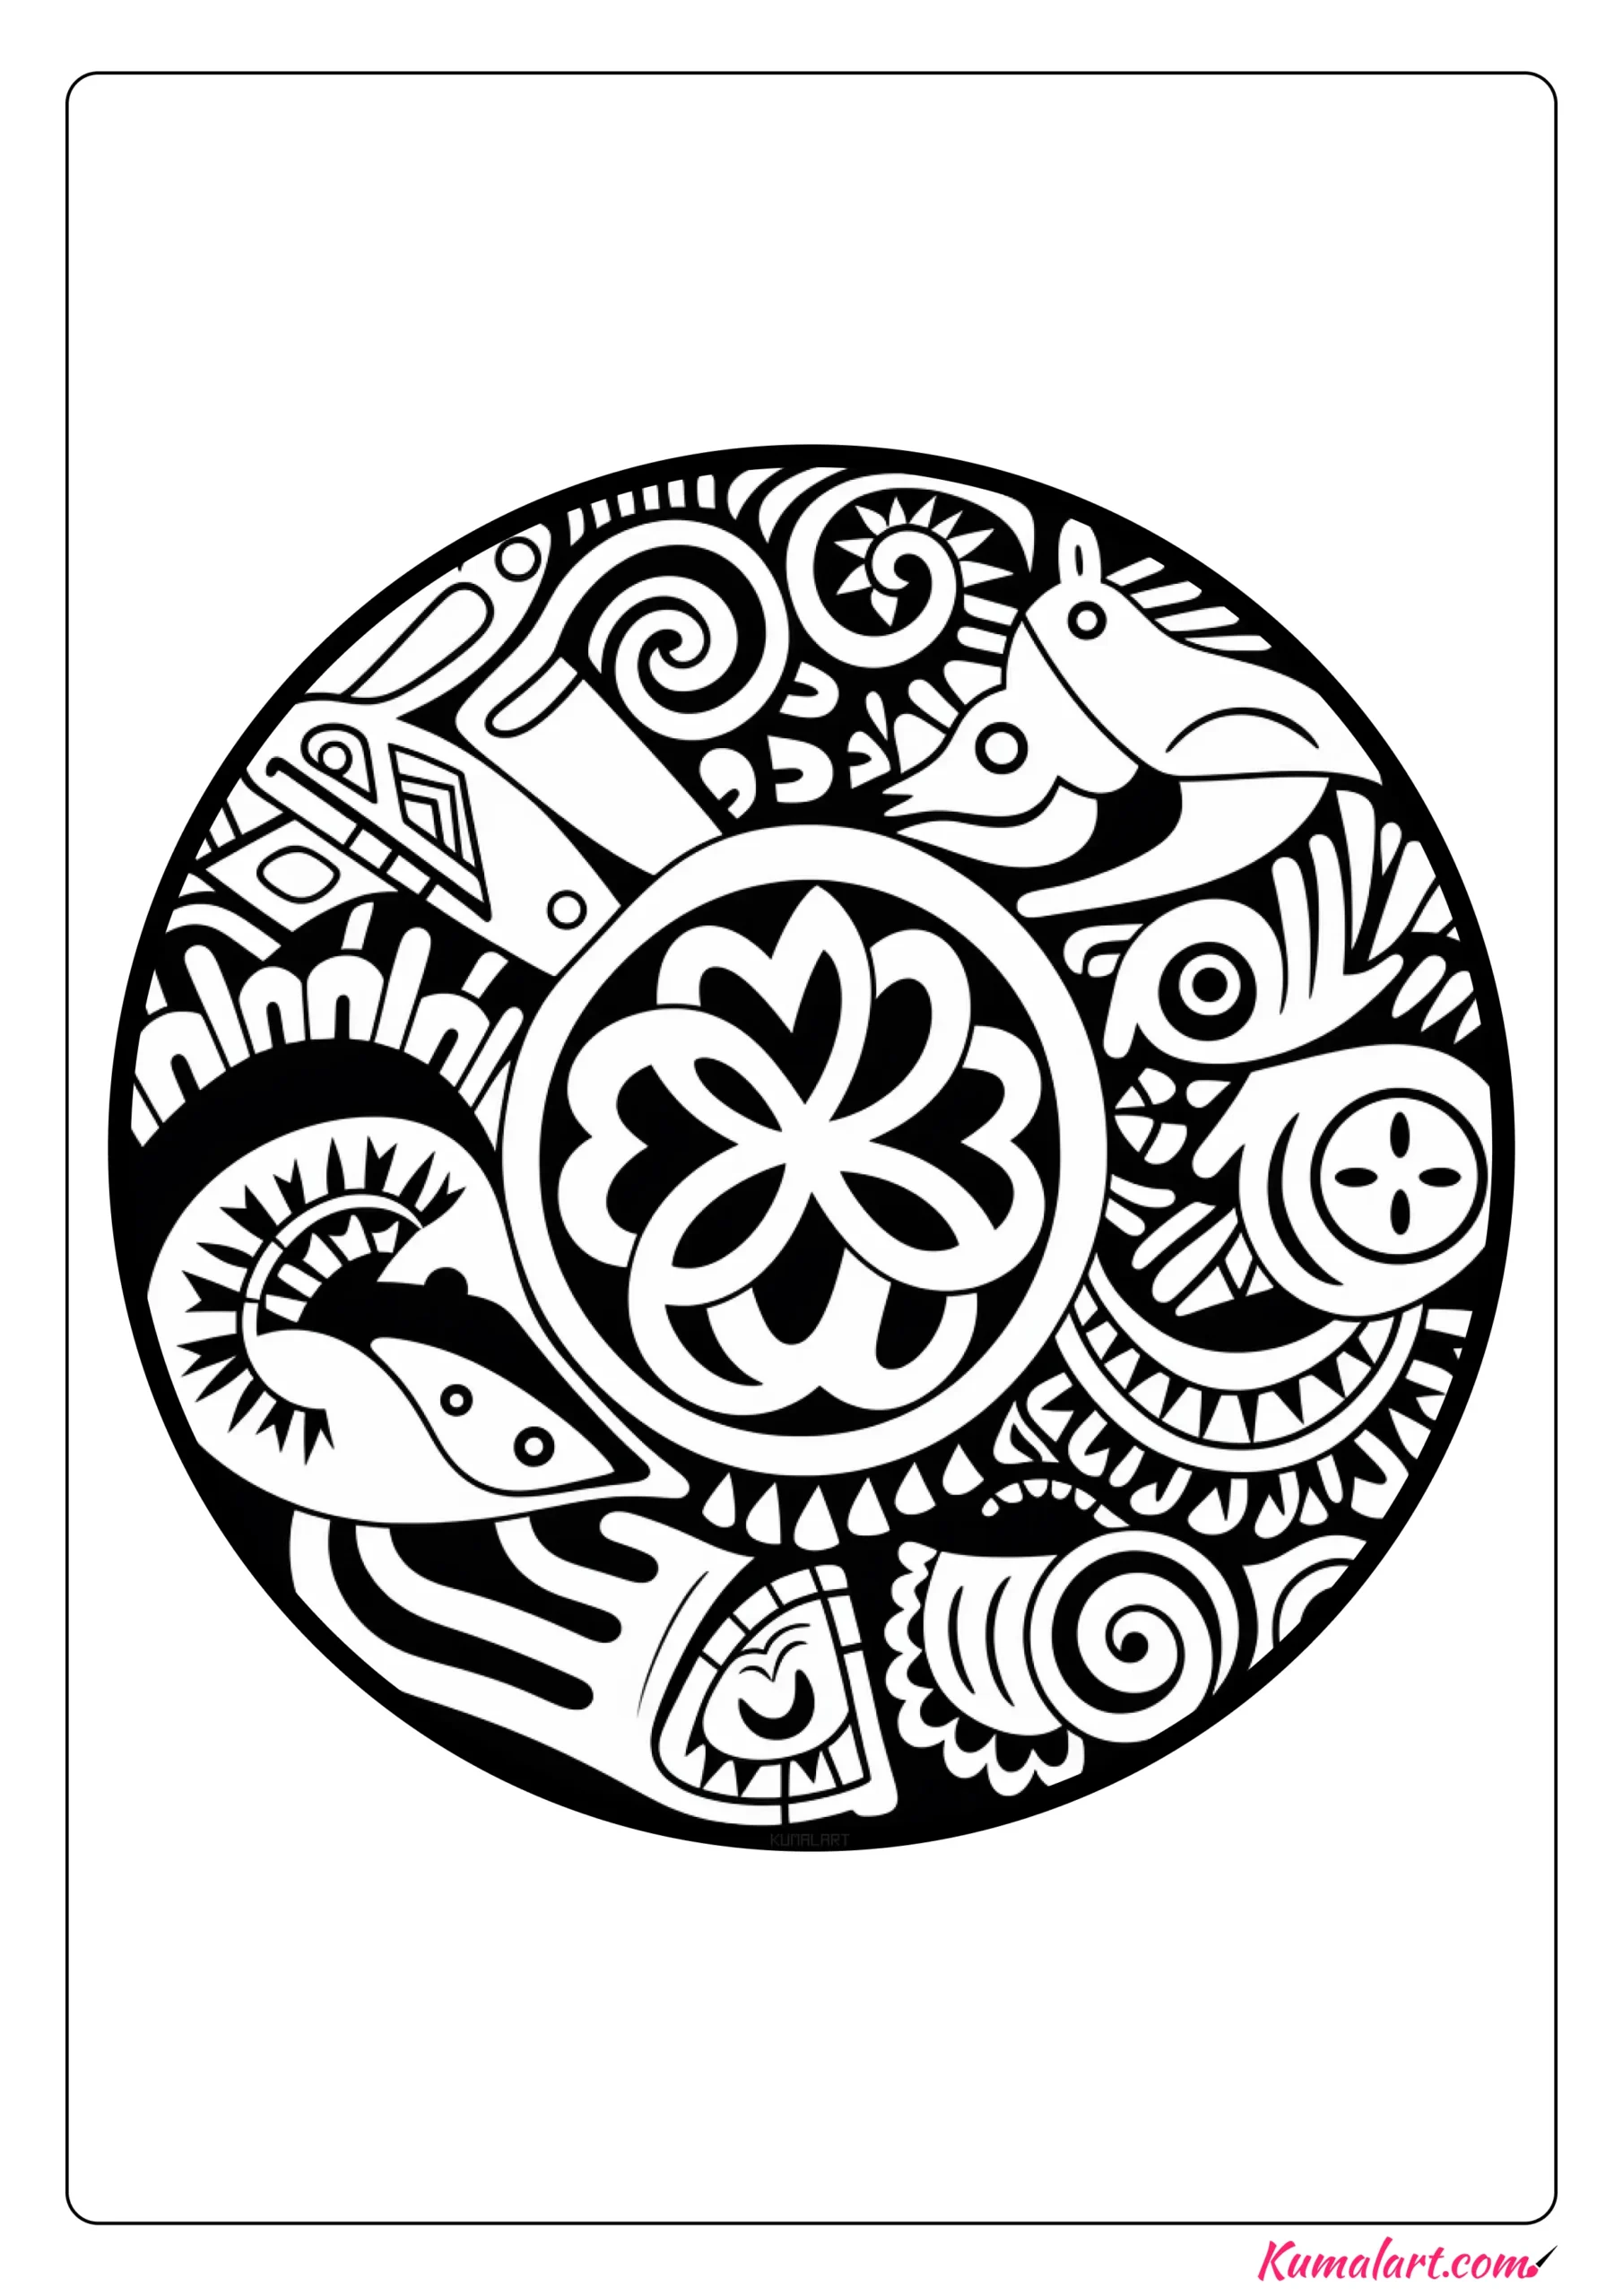 Balancing Stress Relief Coloring Page